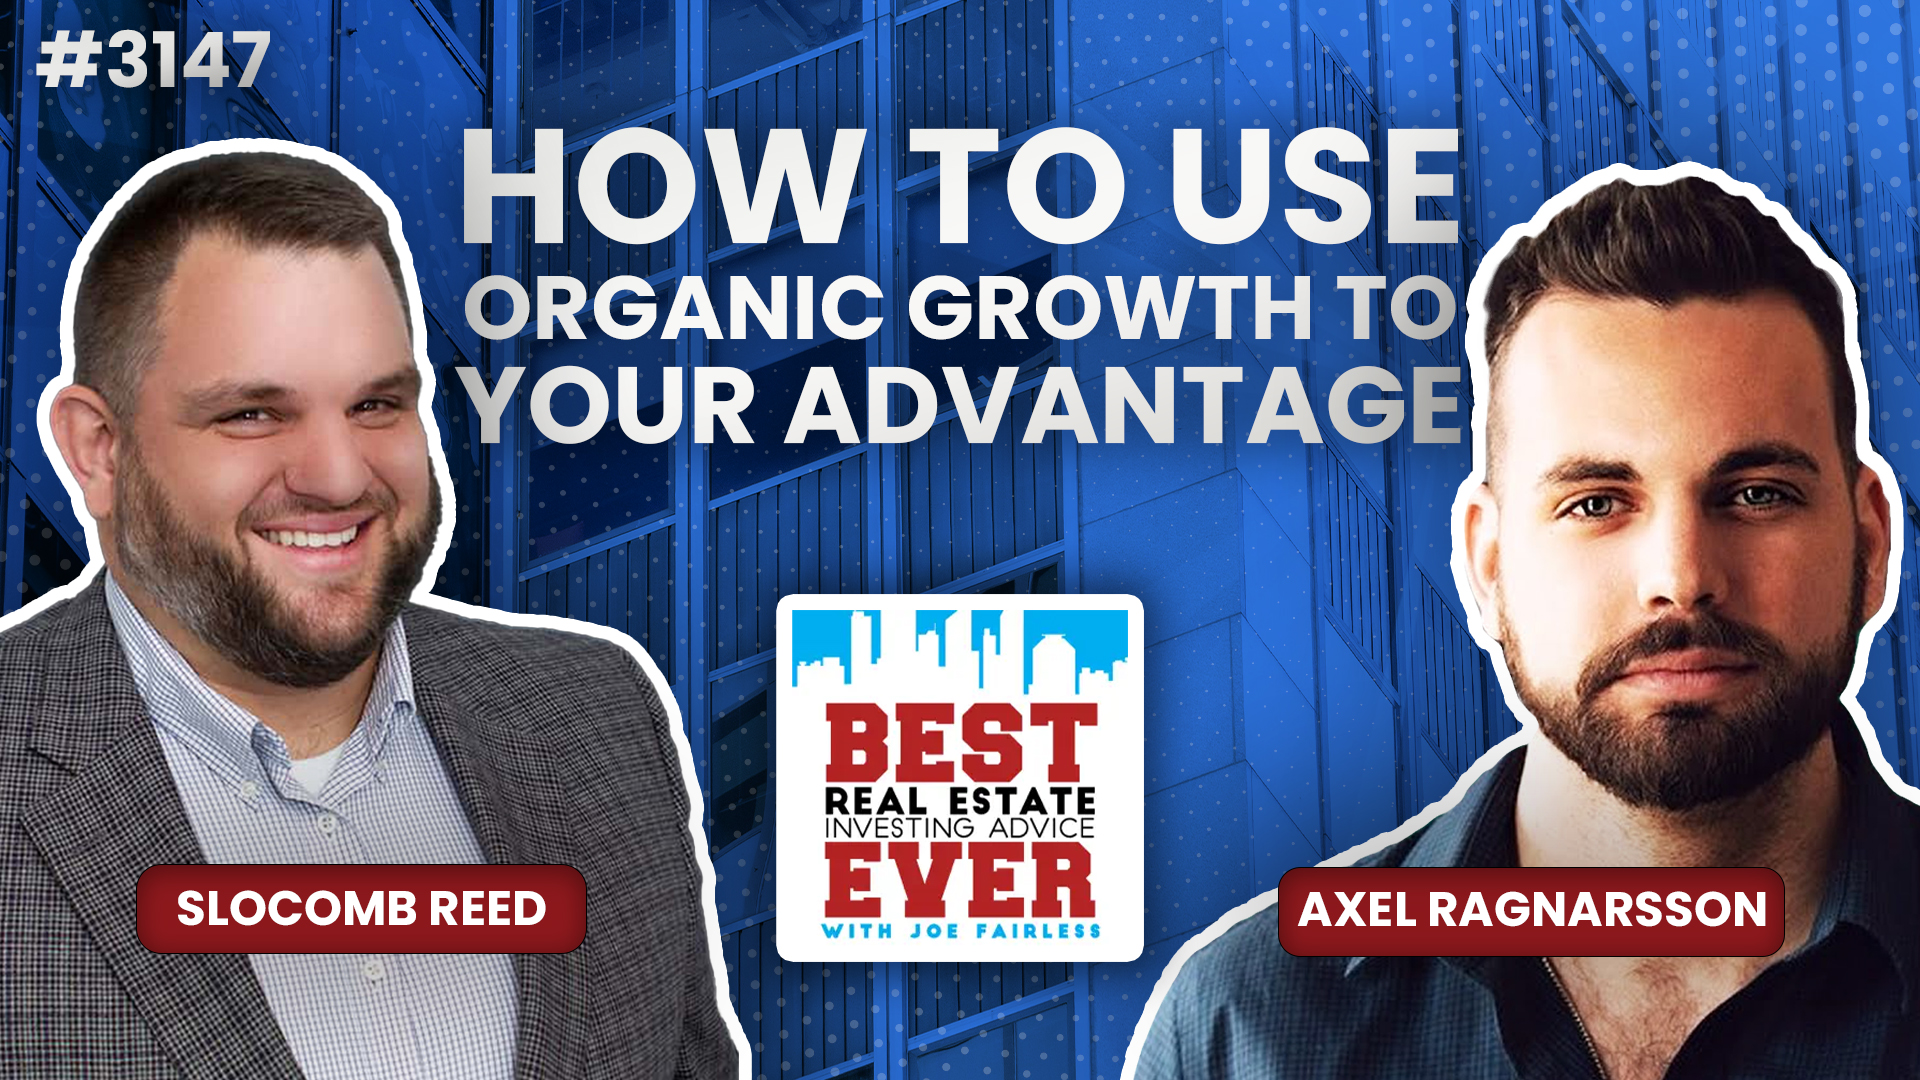 JF3147: How to Use Organic Growth to Your Advantage ft. Axel Ragnarsson